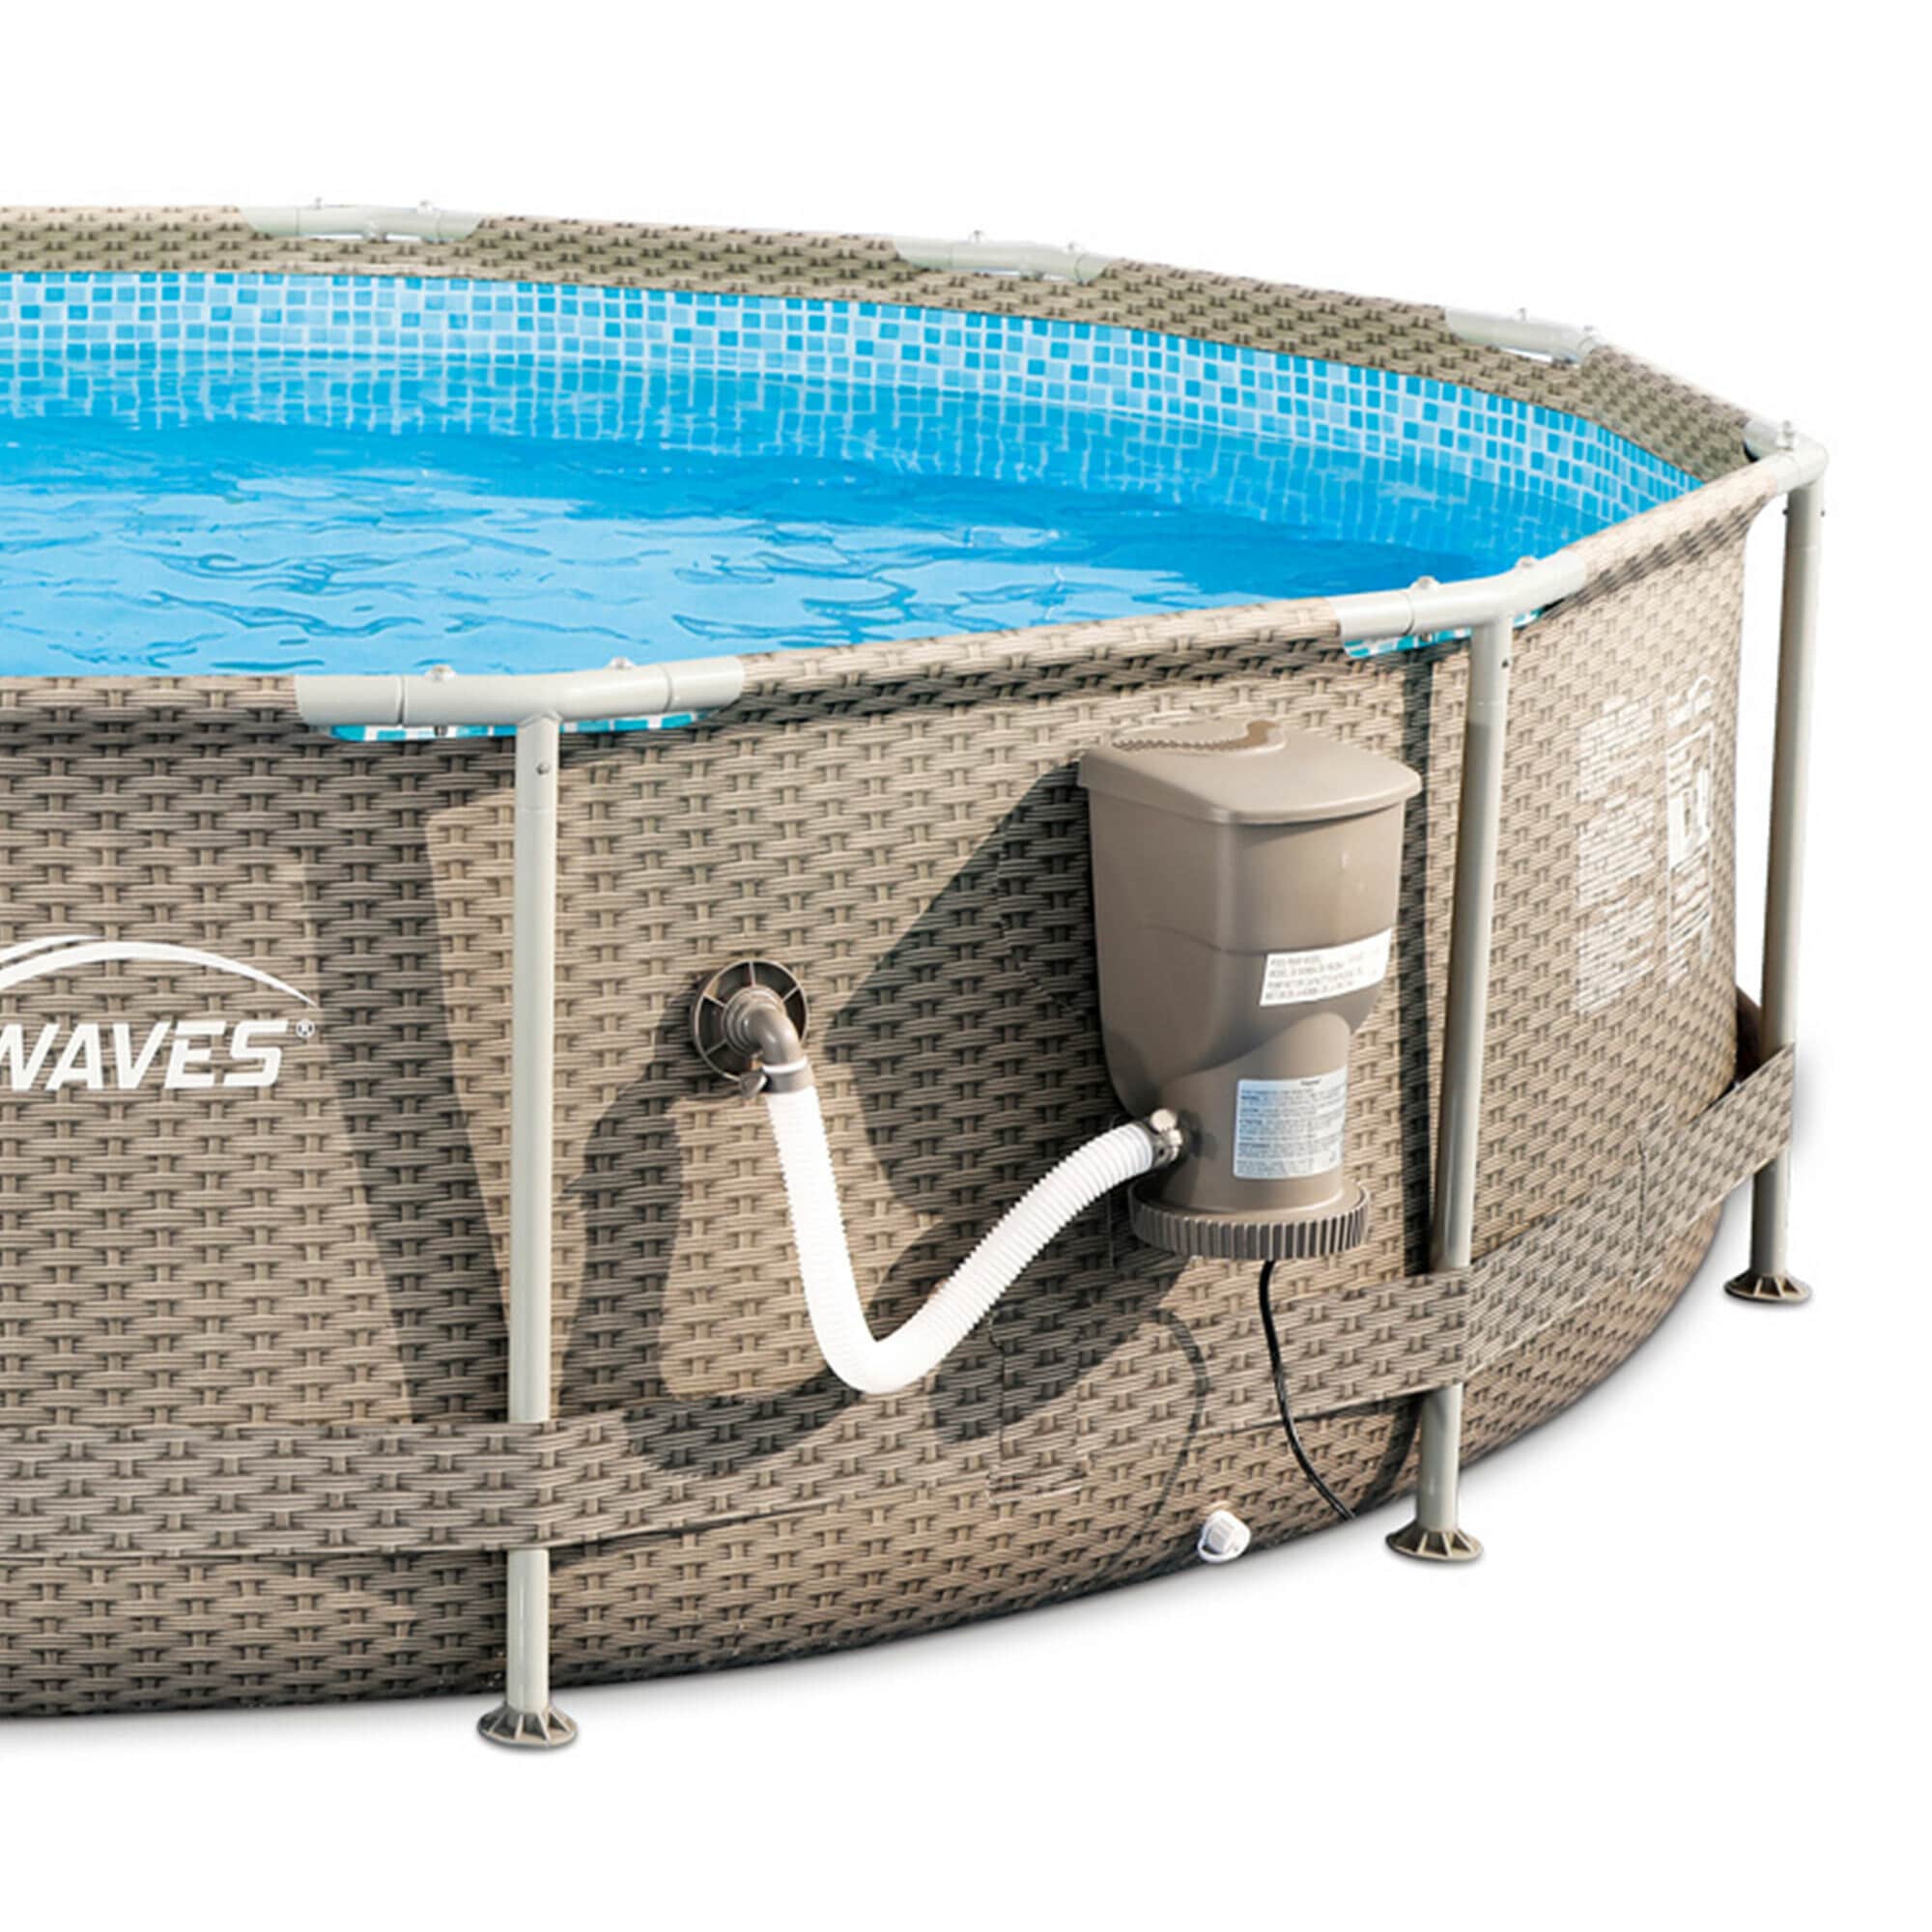 Round x Pump x Frame 12-ft Waves Filter with Summer at 30-in Pool 12-ft Above-Ground Metal